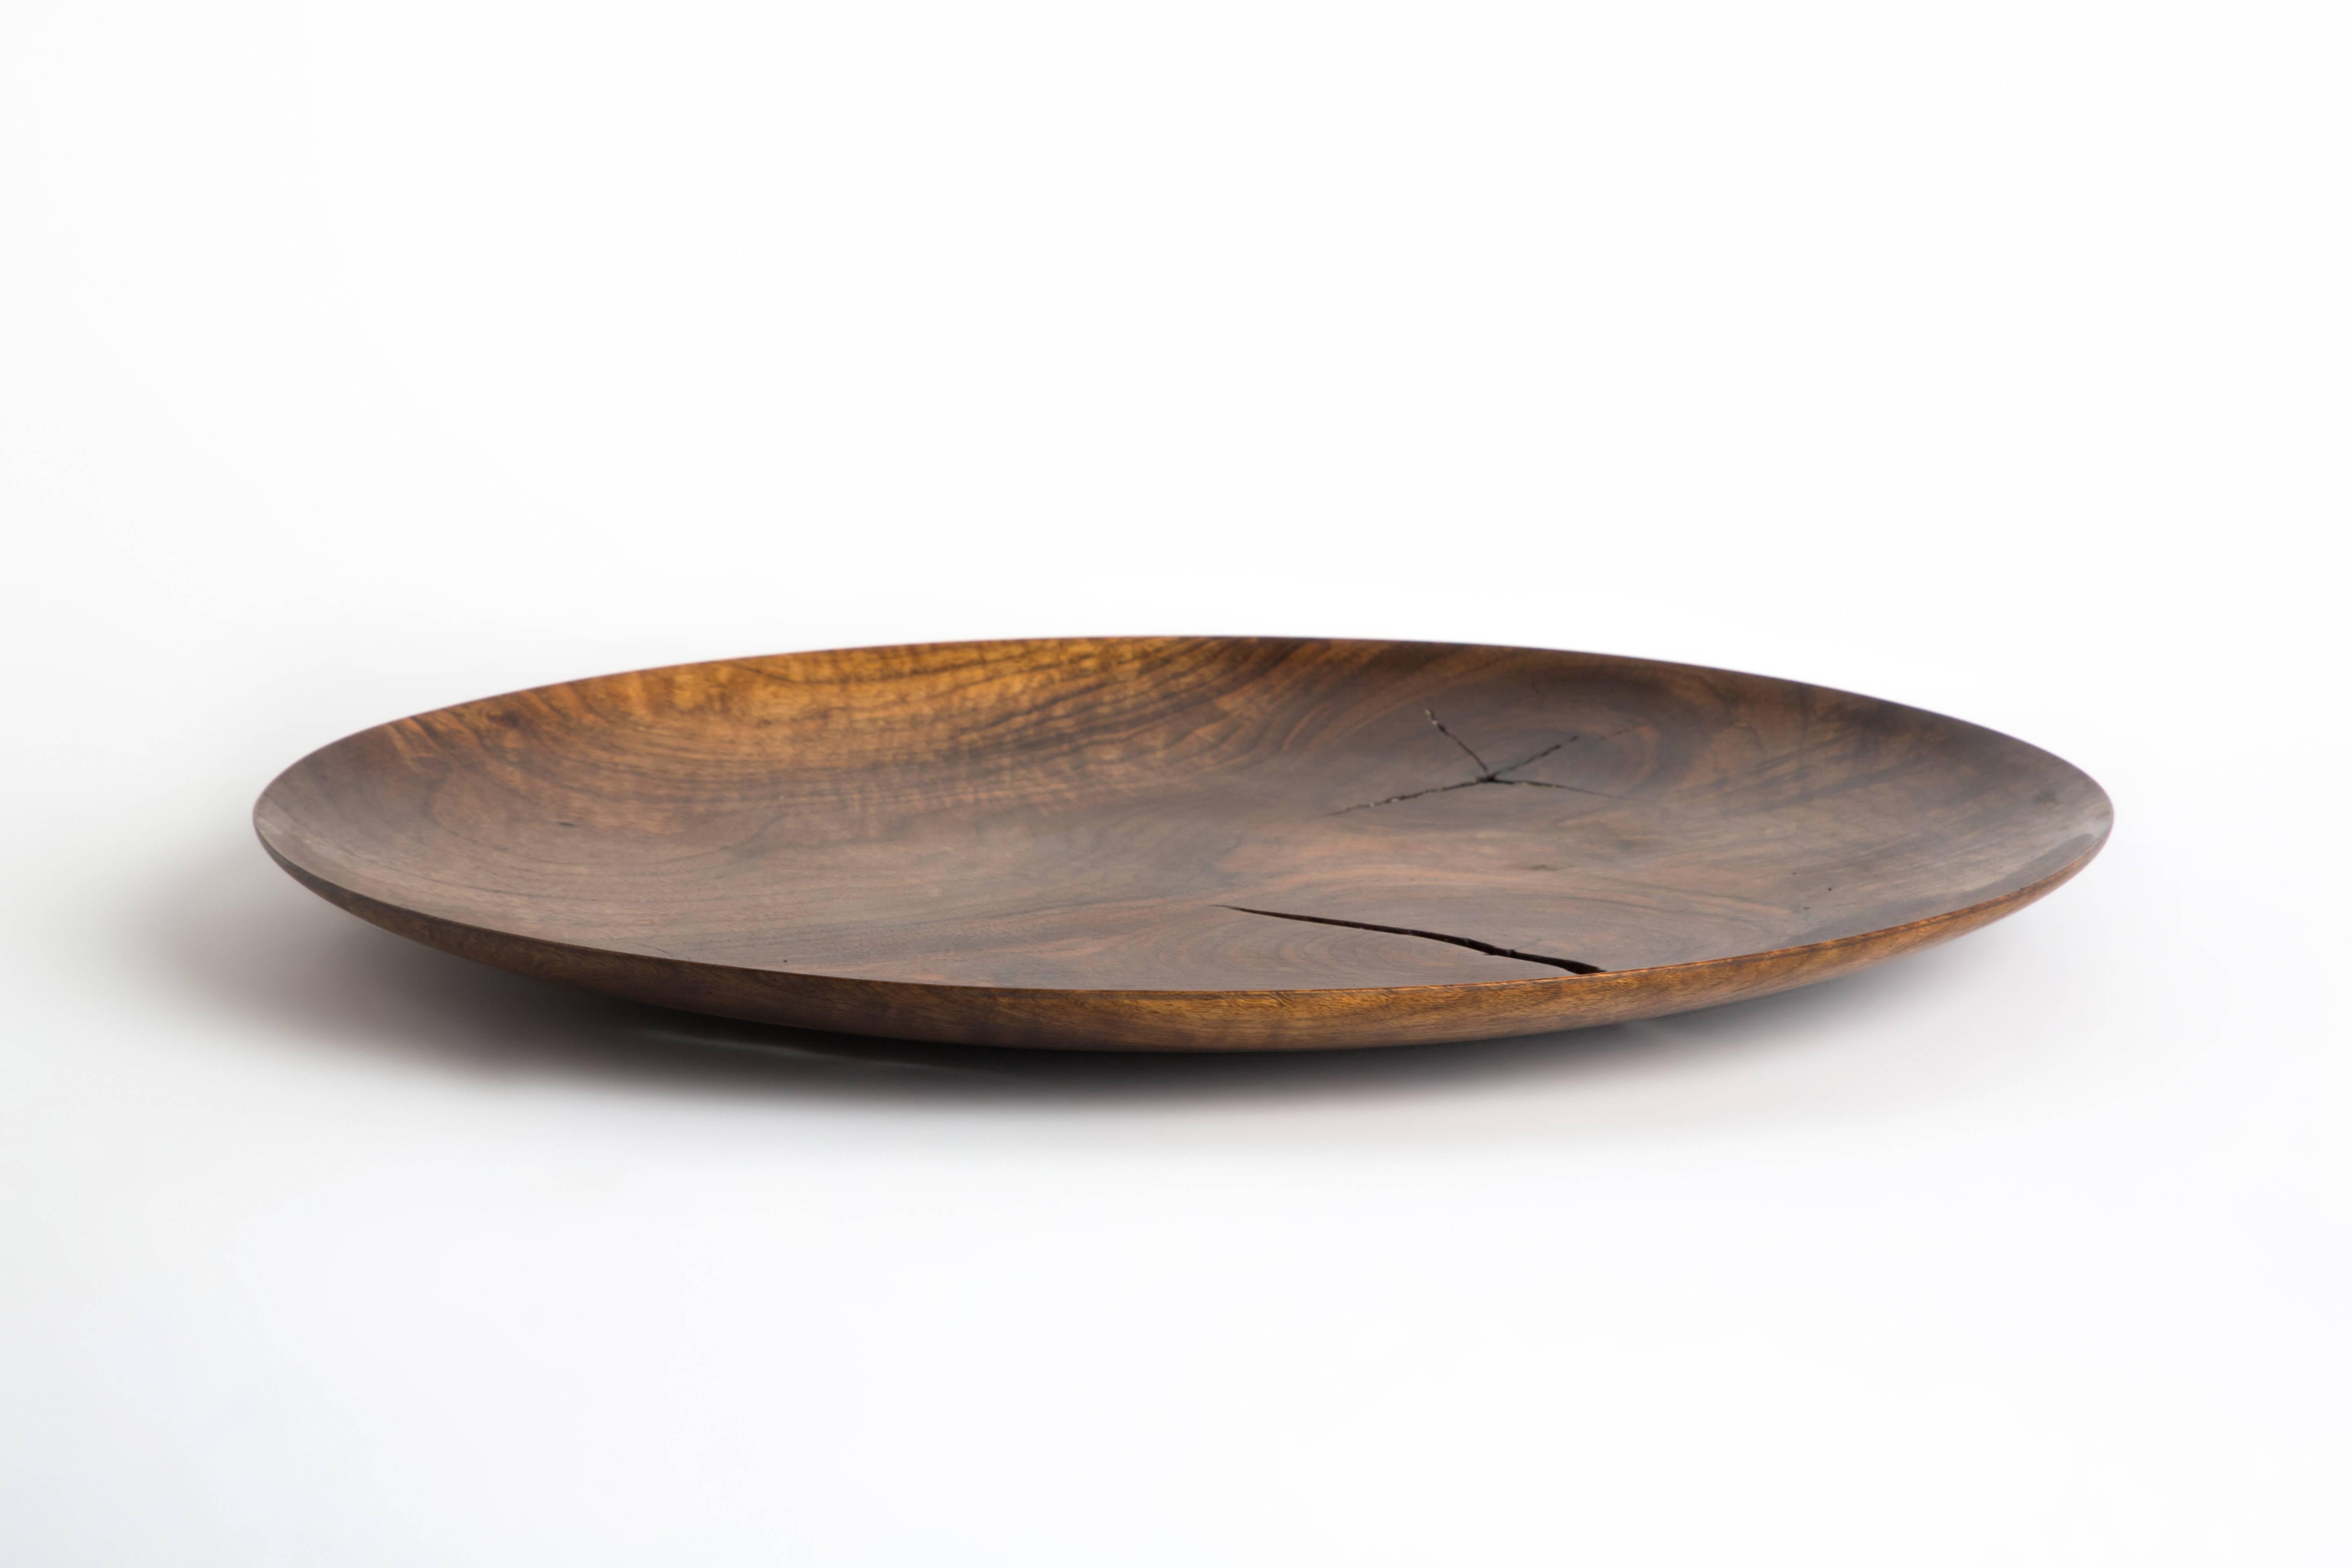 Made from a large slab of French Walnut, this is a unique and one-of-a-kind edition from Erik Gustafson. This tray has a shallow curved lip with distinctive knotting. 

Gustafson’s inspiration stems from a love of the history of art, architecture